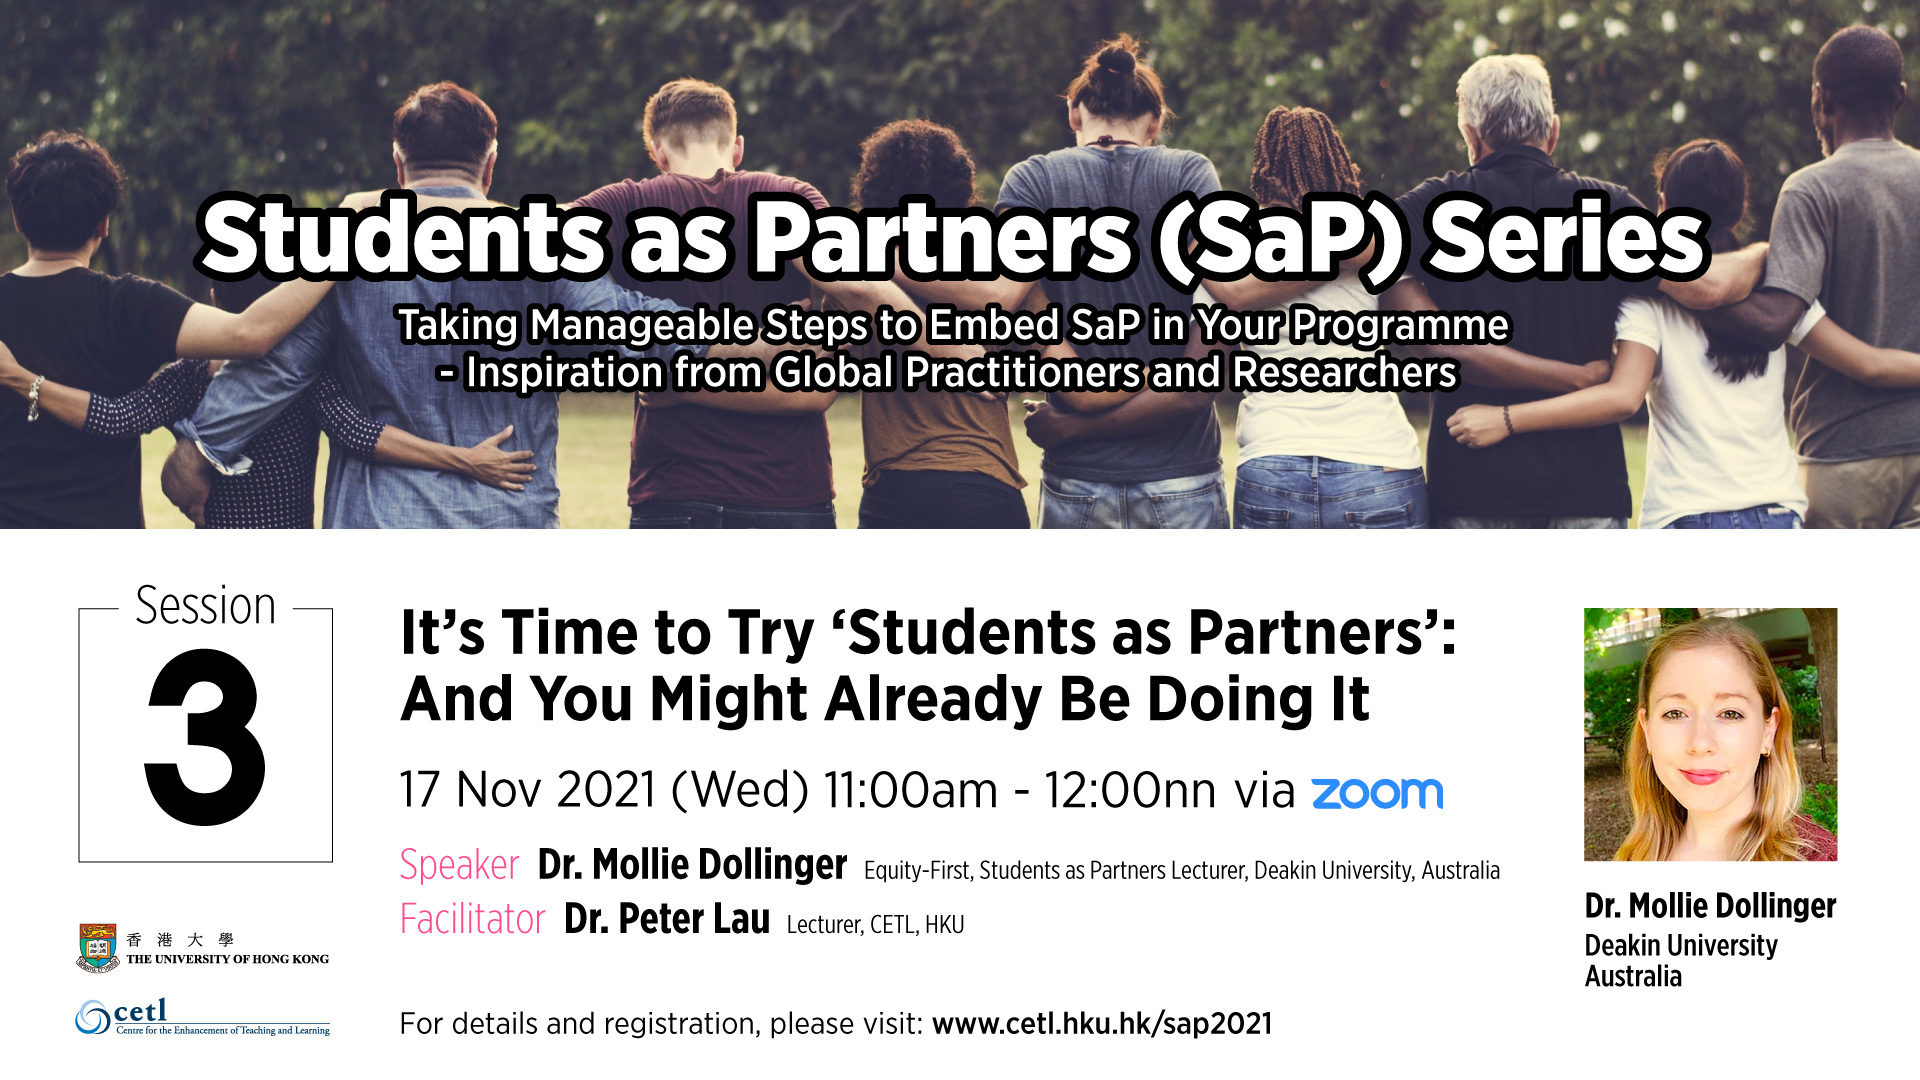 Session 3: It’s Time to Try ‘Students as Partners’: And You Might Already Be Doing It